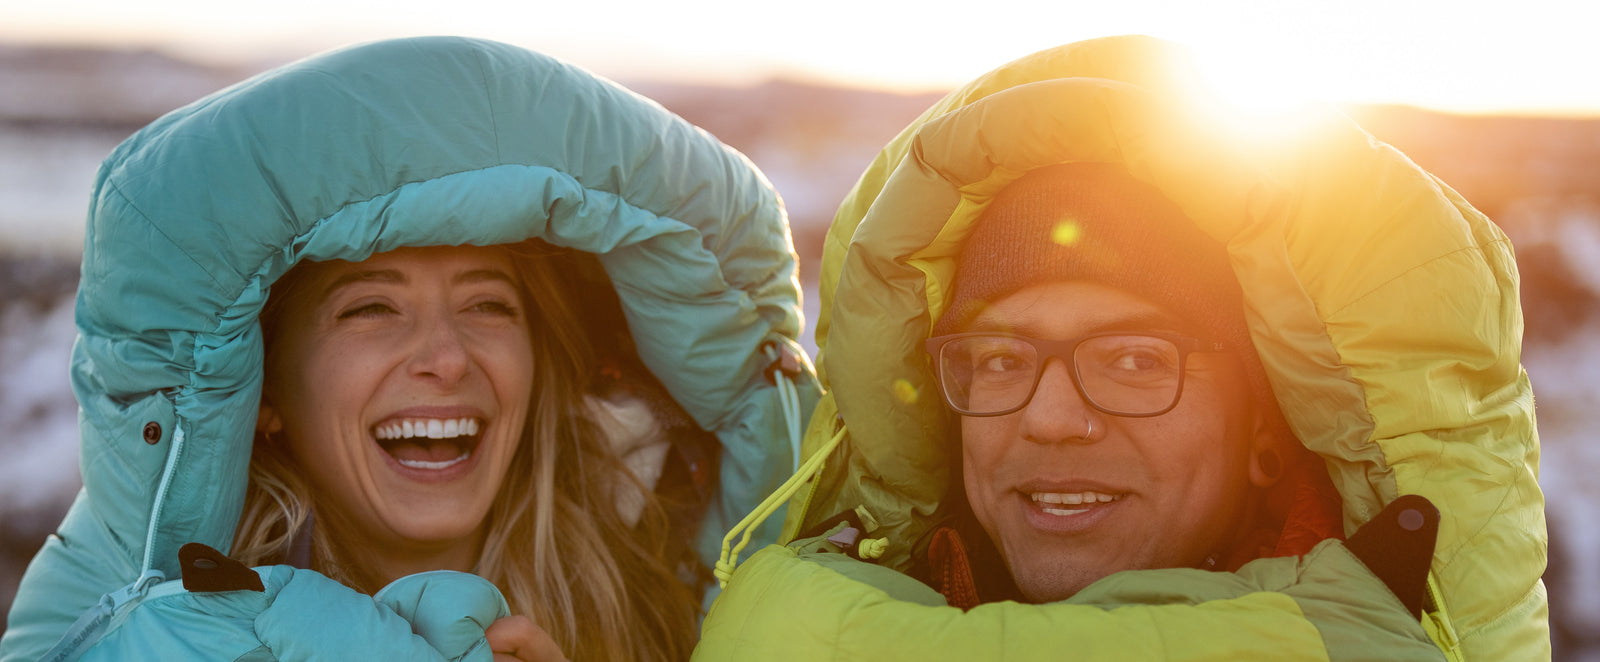 What does loft mean when it comes to sleeping bags?